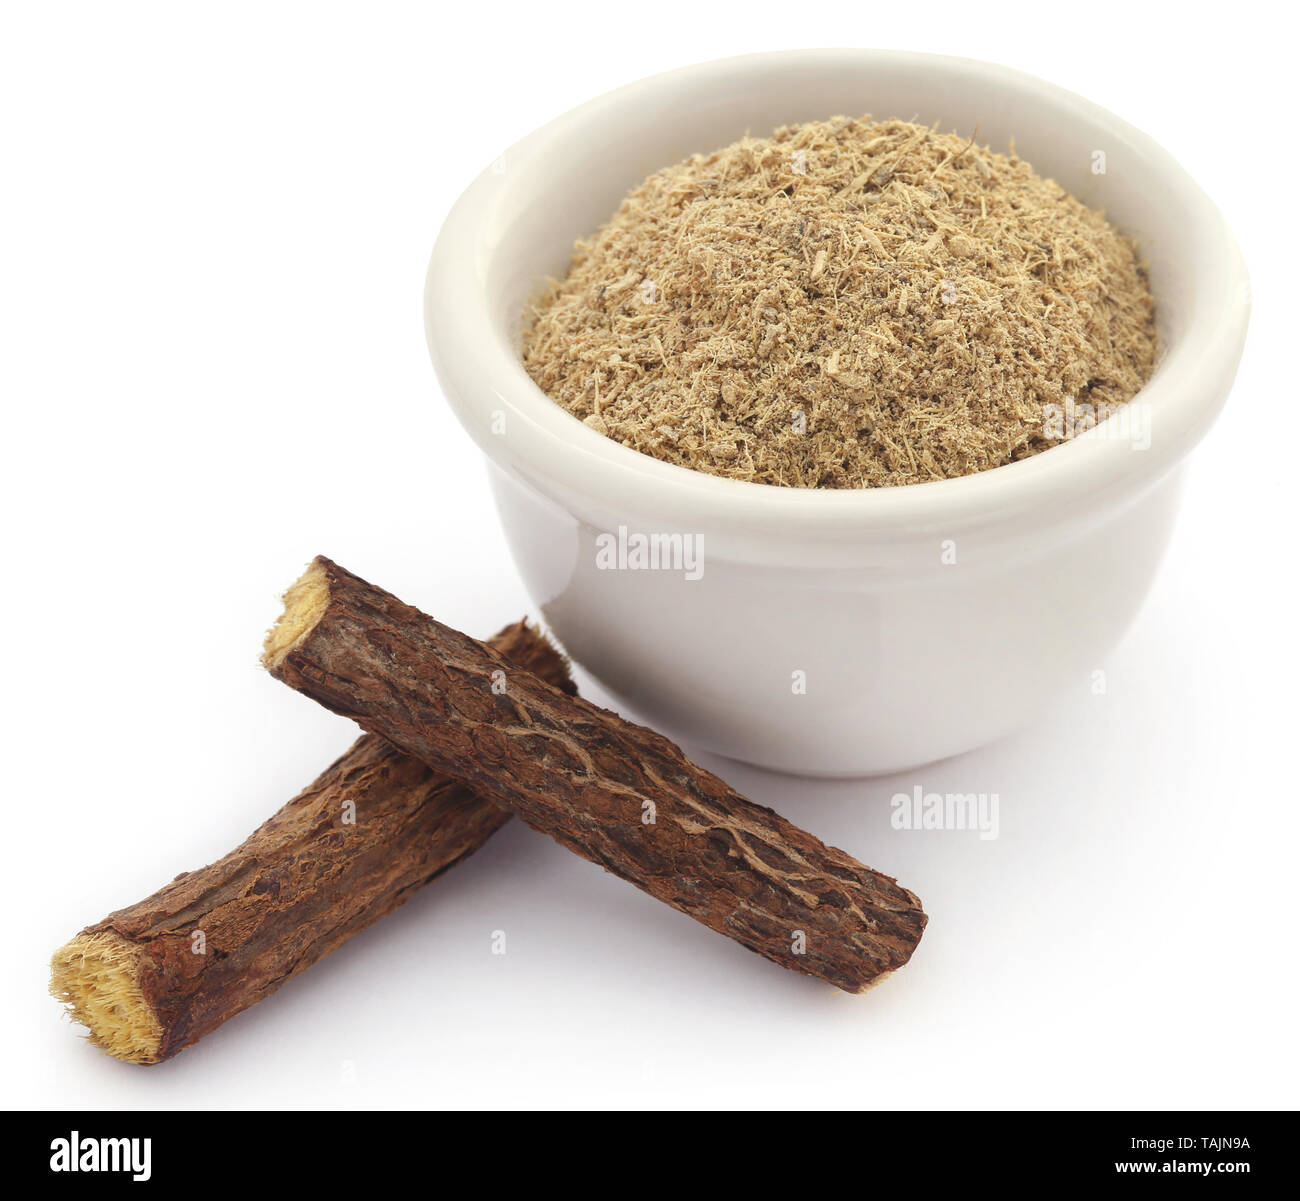 Liquorice stick and ground powder in a bowl over white background Stock Photo